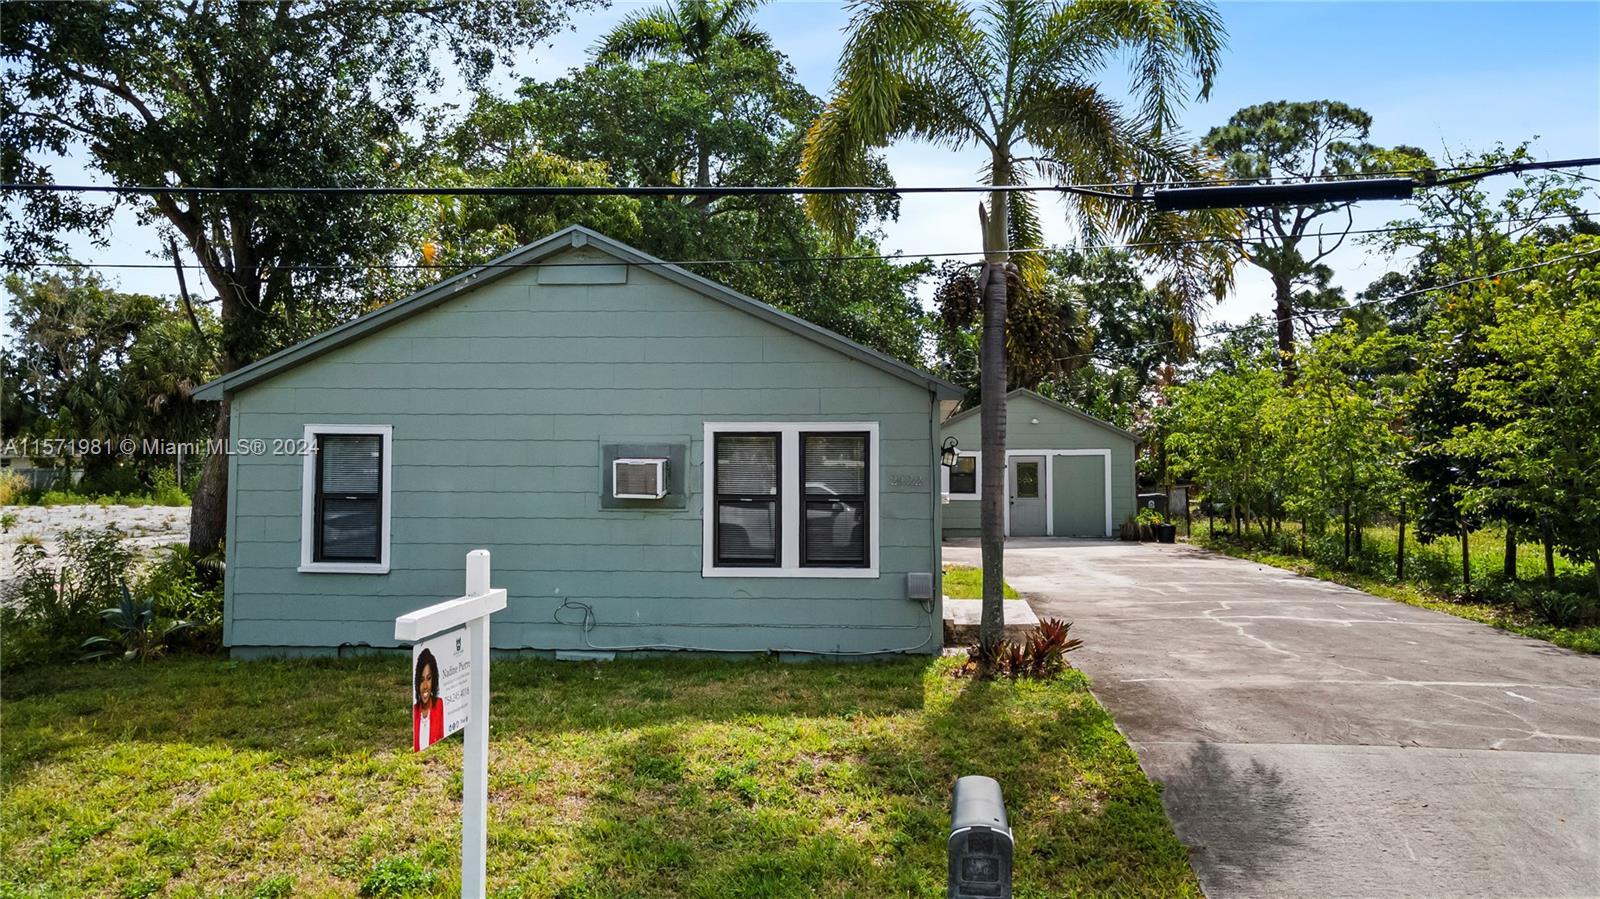 Great opportunity to own an affordable home close to downtown west palm beach! This home has a main 